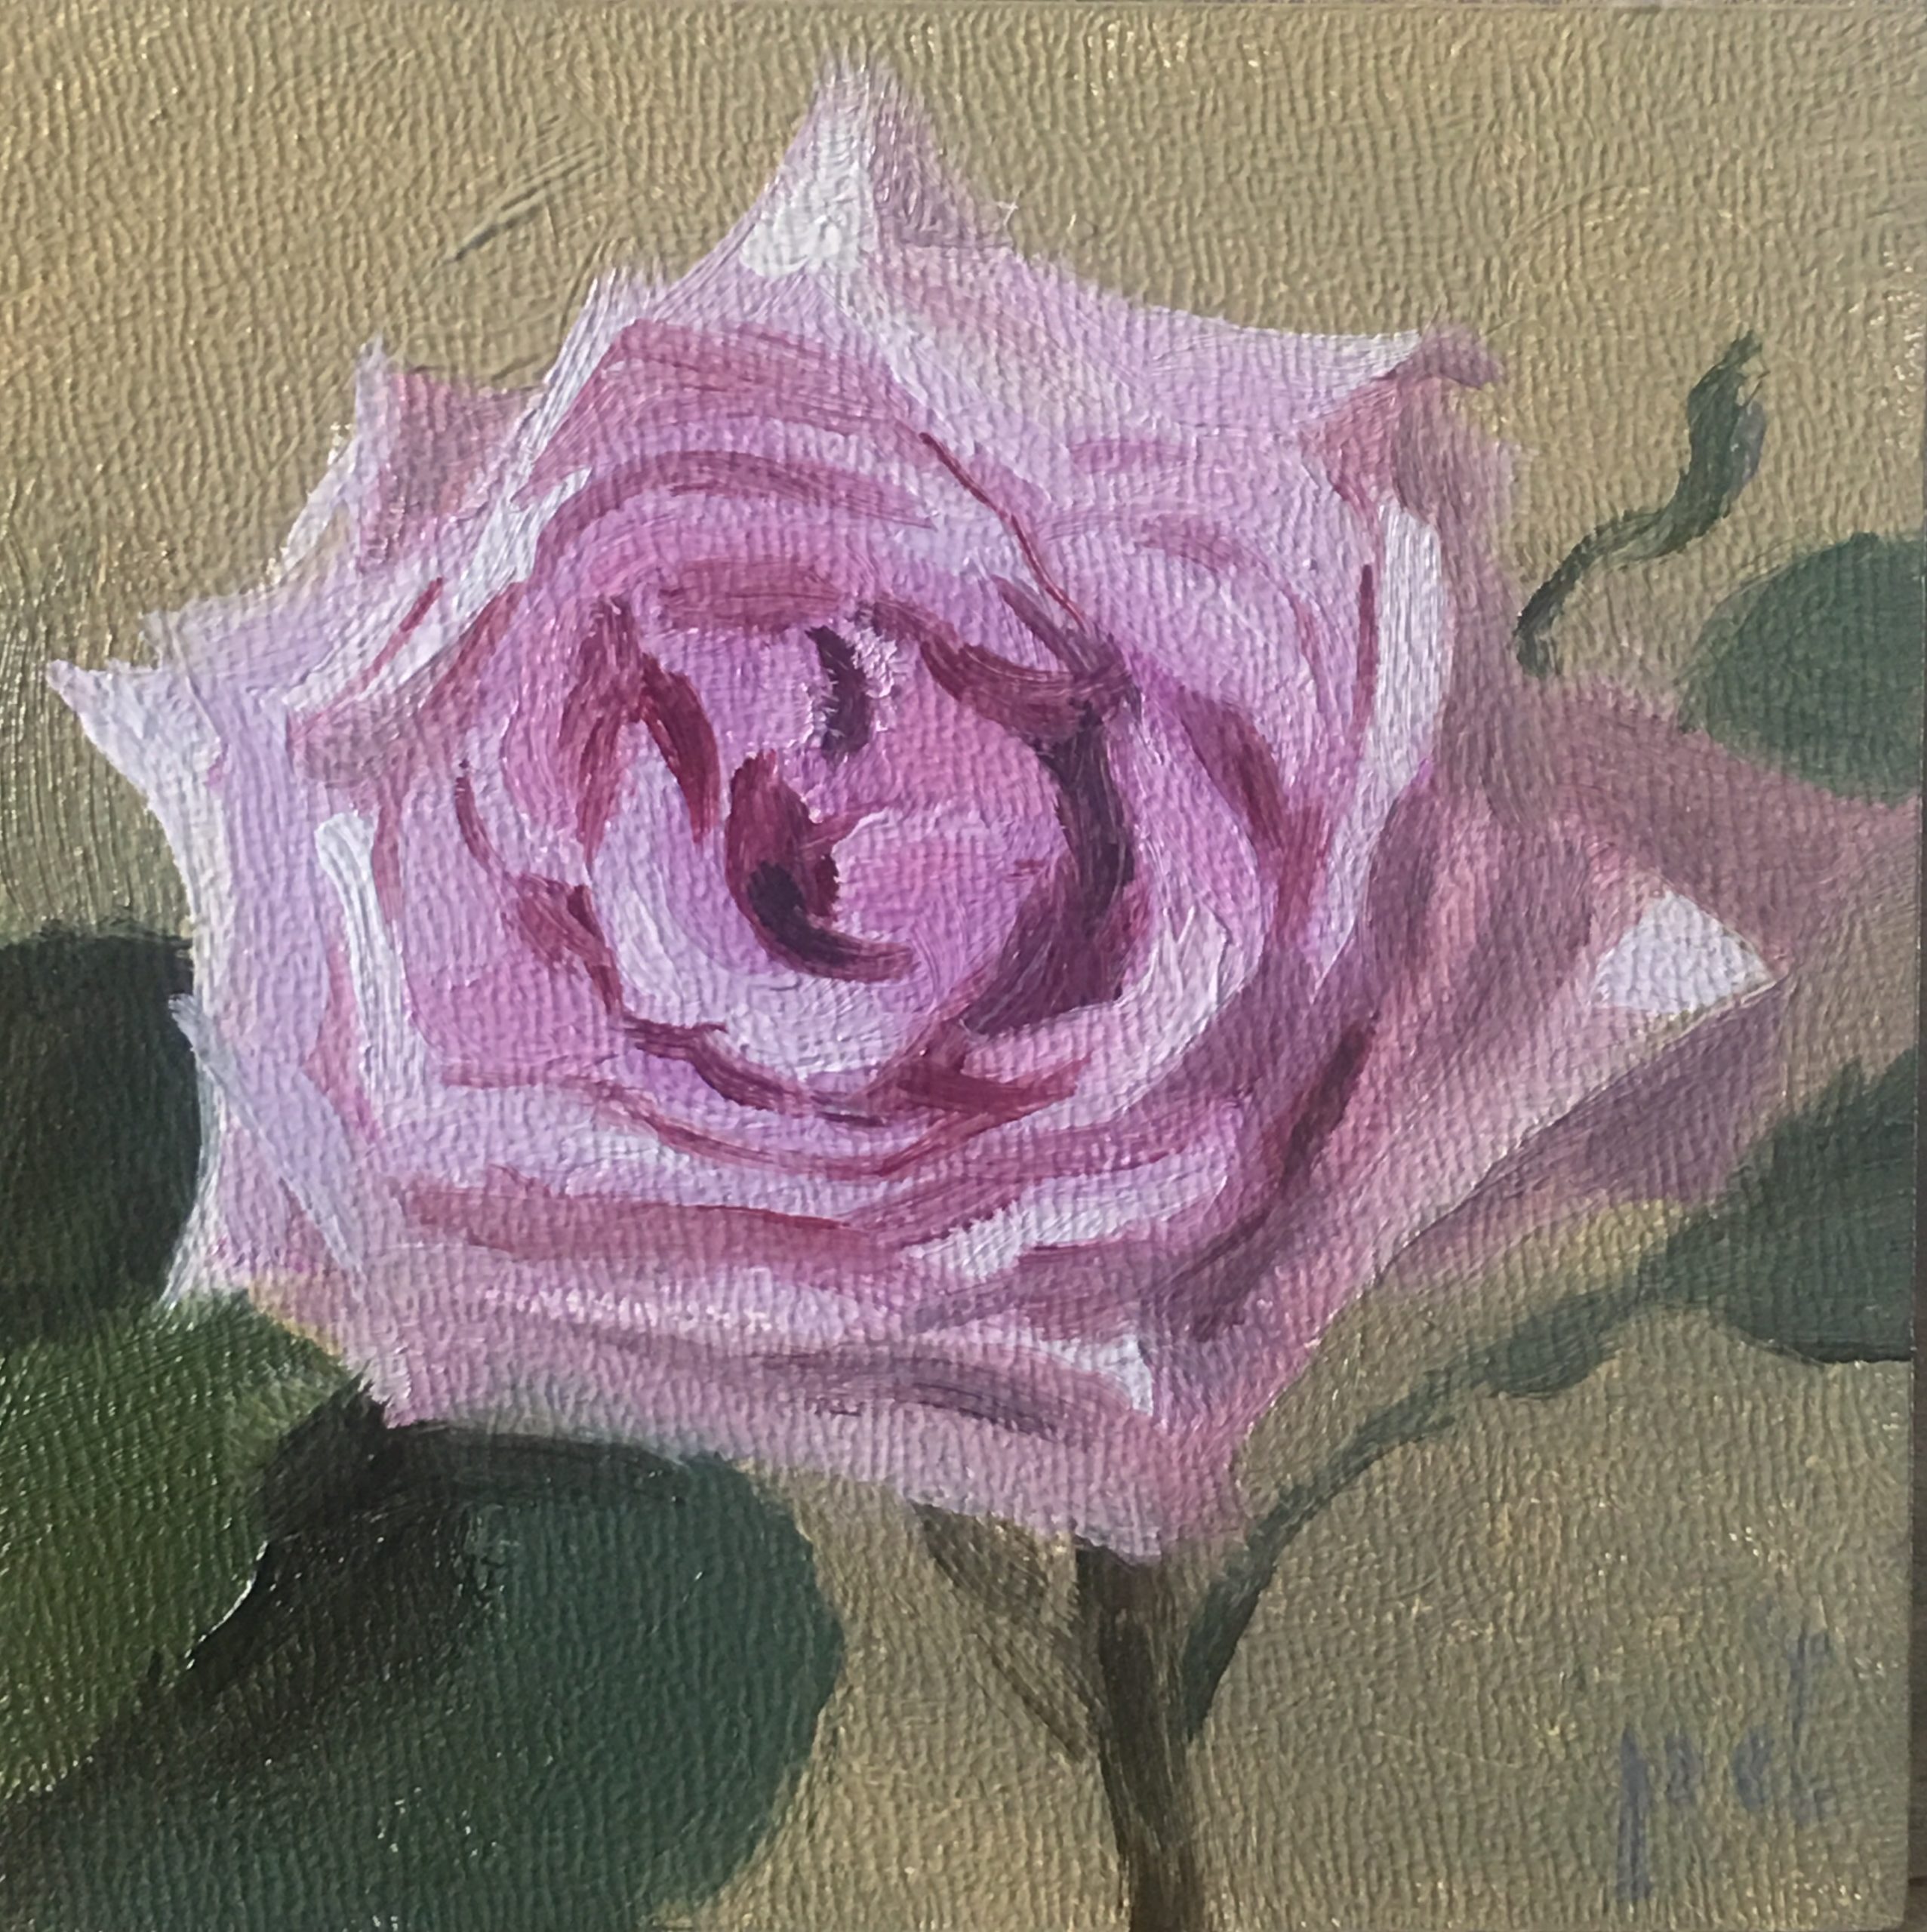 Lilac Rose oil painting copyright 2017 Peter Dickison